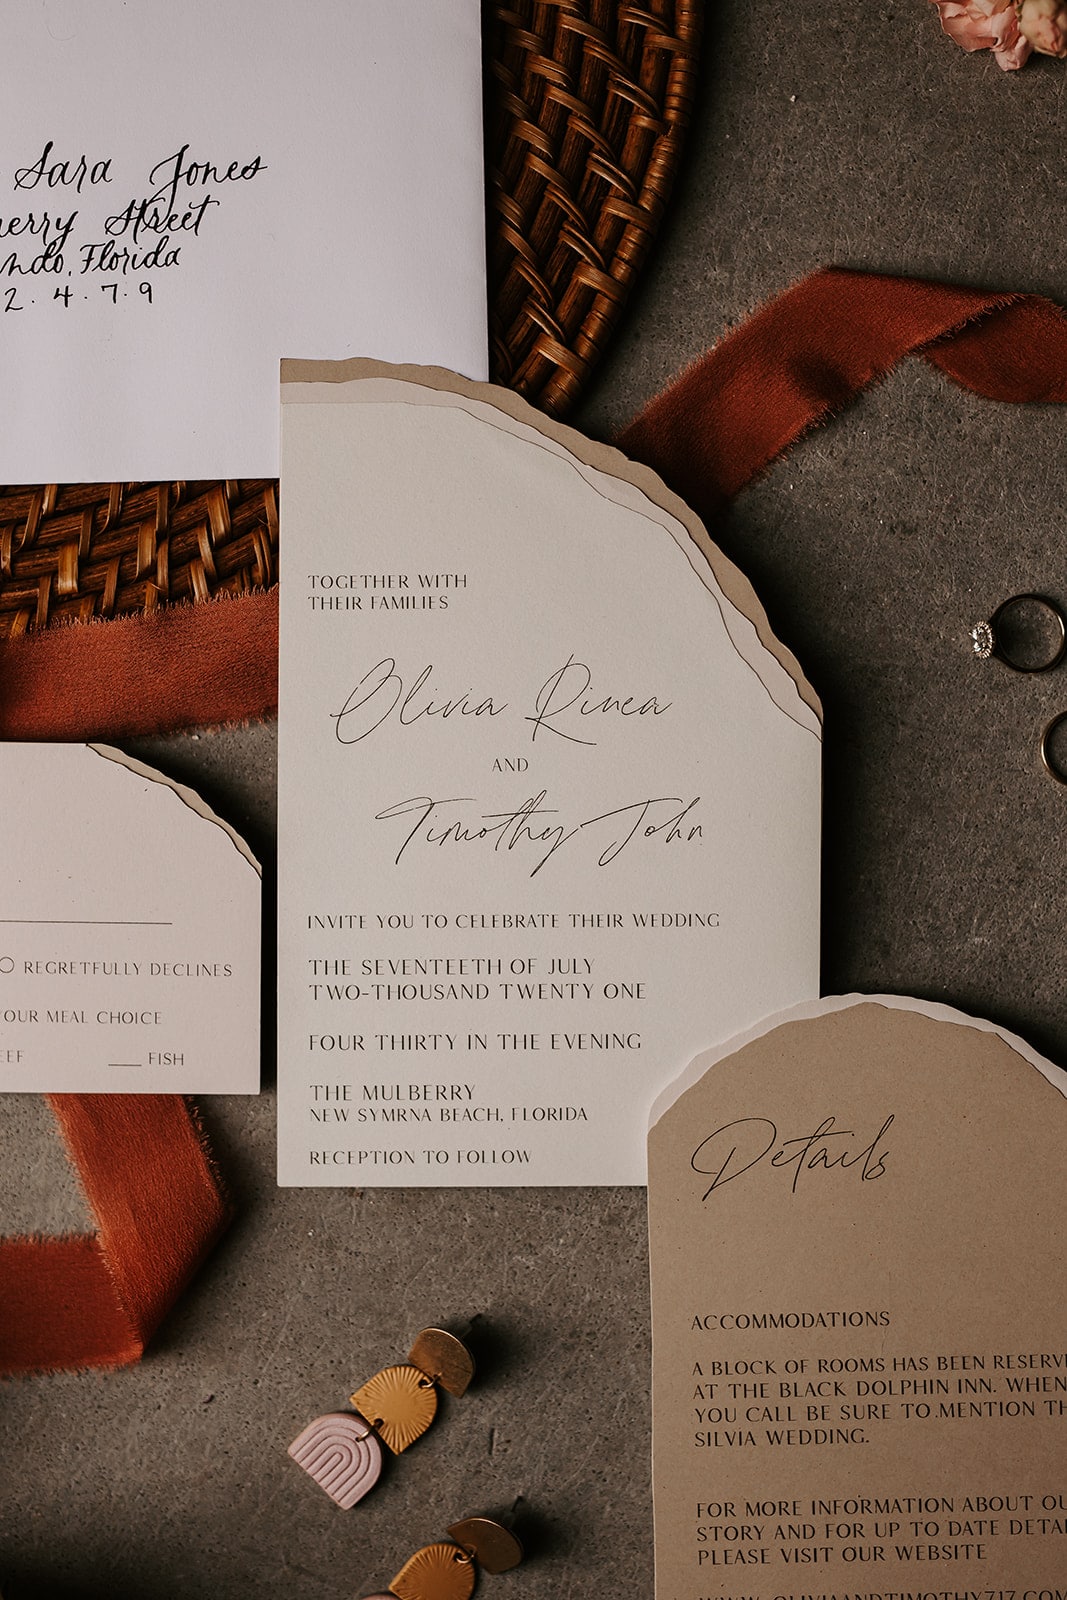 Sedona inspired wedding invitations by Bare Lettered Designs